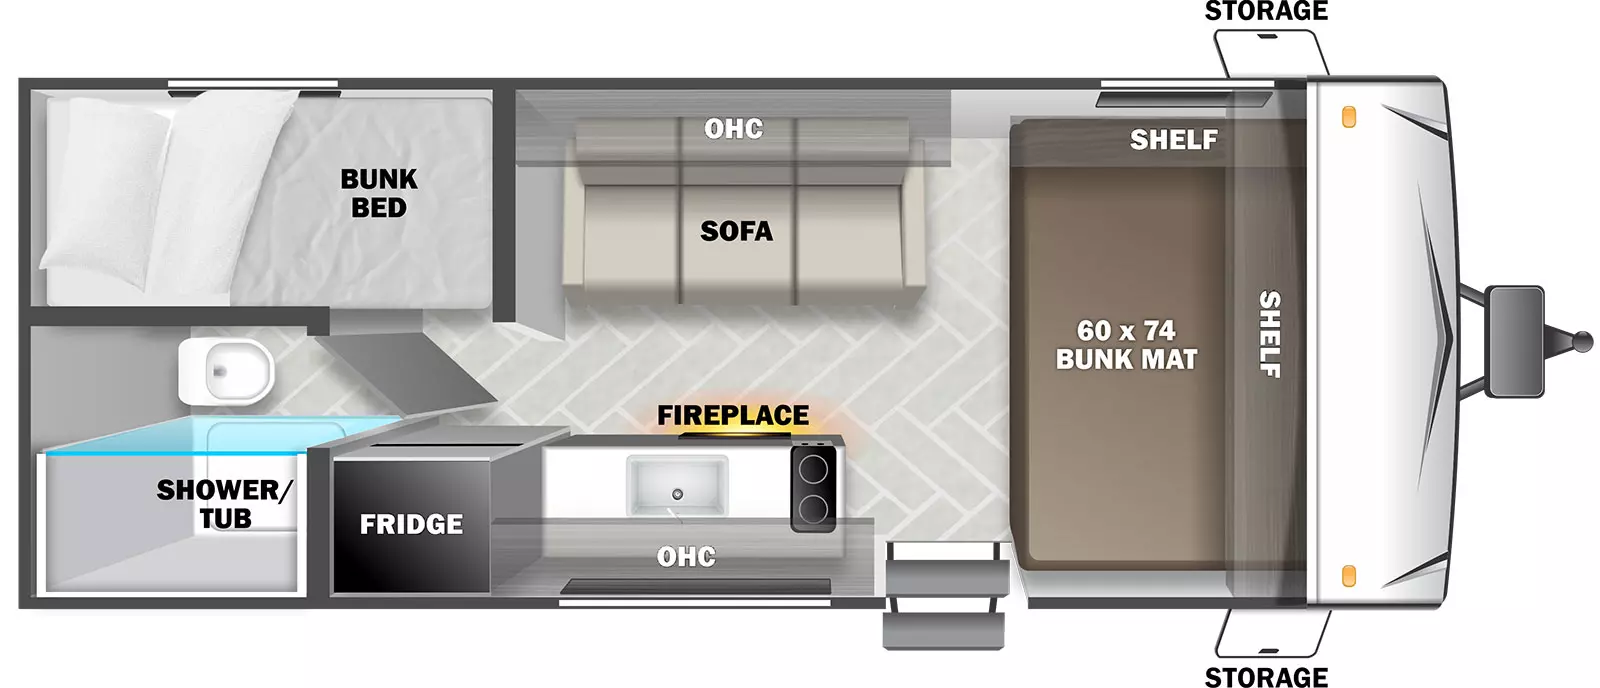 The T175BHCE has no slide outs and 1 entry door. Interior layout from front to back: front 60 x 74 bunk mat with shelves above; off-door side sofa with overhead cabinet; door side kitchen with sink, refrigerator, fireplace, overhead cabinet and stove top; rear door side bathroom with shower/tub and toilet; and rear off-door side bunk bed.